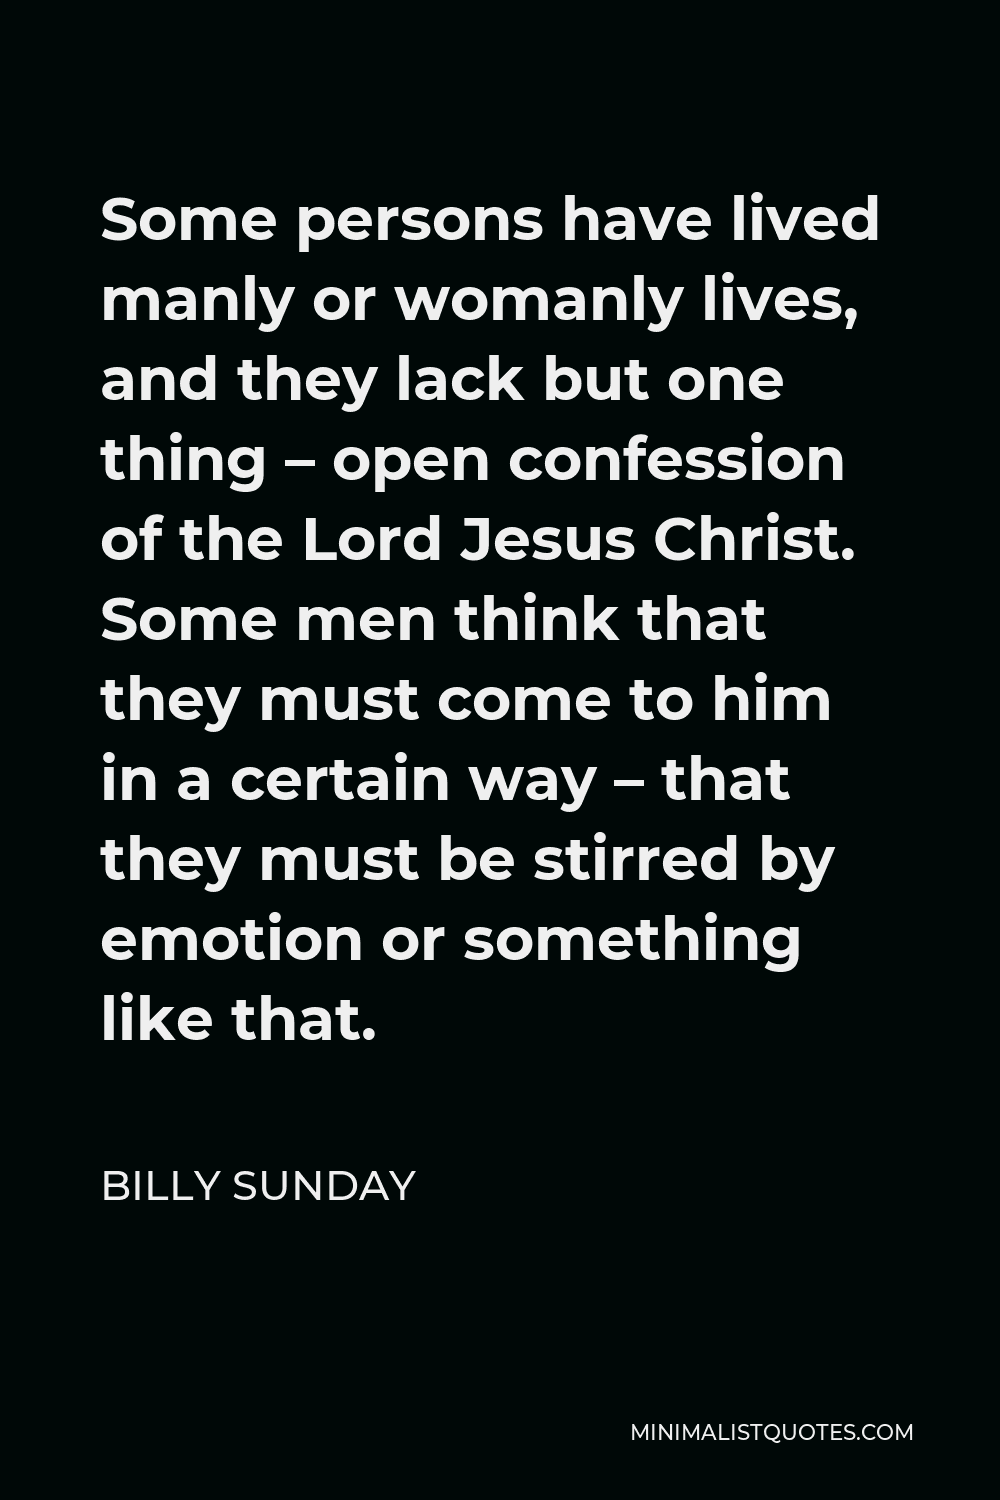 Billy Sunday Quote - Some persons have lived manly or womanly lives, and they lack but one thing – open confession of the Lord Jesus Christ. Some men think that they must come to him in a certain way – that they must be stirred by emotion or something like that.